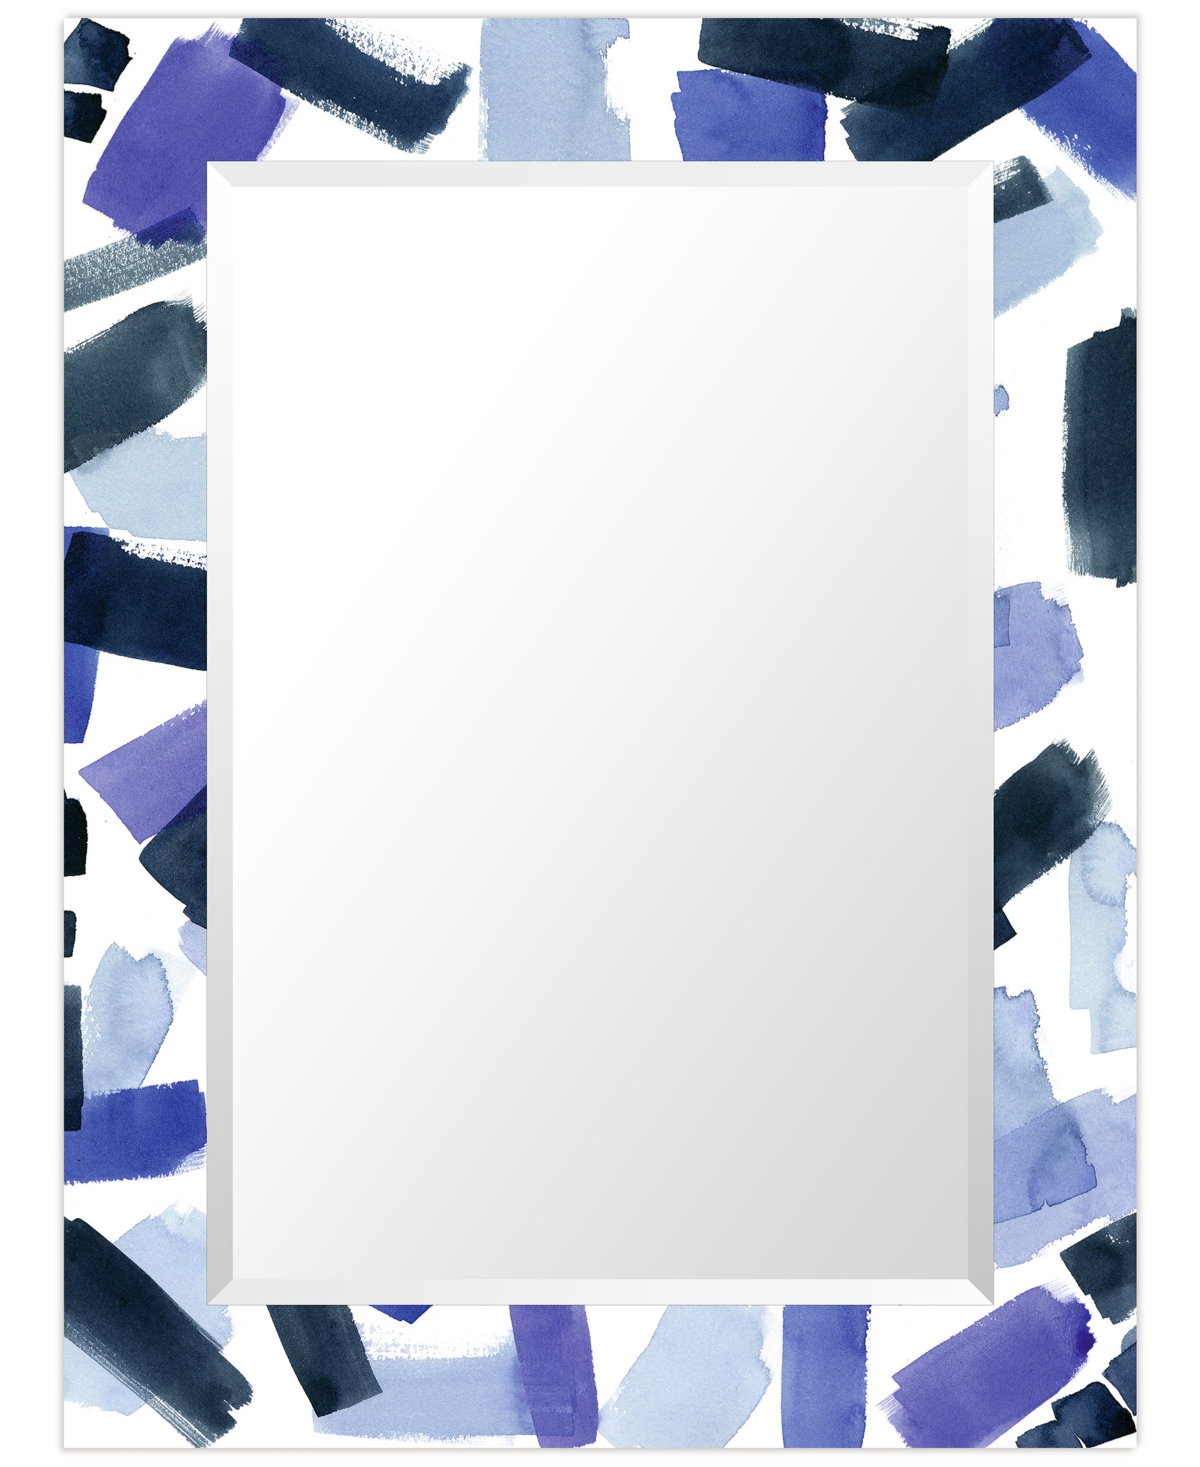 'Cerulean Strokes' Rectangular On Free Floating Printed Tempered Art Glass Beveled Mirror, 40" x 30" - Purple, Navy